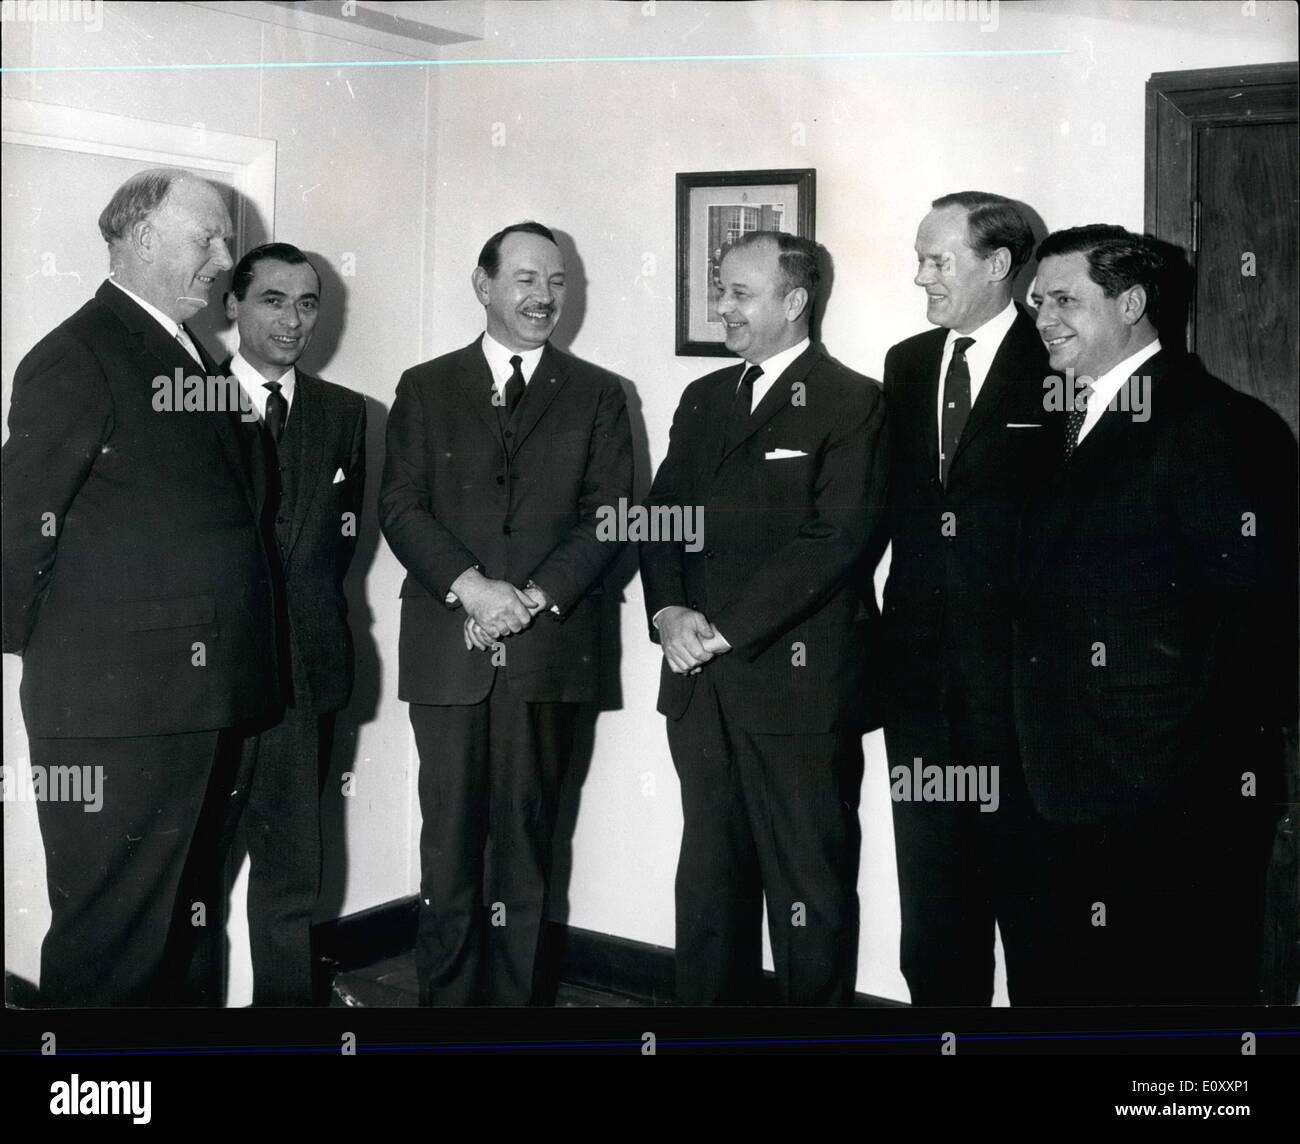 Jan. 01, 1968 - Discussing U.S. Visit: At Horseferry House in London, Sir Eric St. Johnston, H.M. Chief Inspector of Constabulary, and Mr. John Minnich, Legal Attache at the U.S. Embassy, discussed with Deputy Chief Constable H.J. Phillips (Hampshire), Assistant Chief constable P.D. Knights (Brimingham), Deputy Chief Constable R. Gregory ( Devon and cornwall) and DET. Chief Inspector R.C. Steventon (Metropolitan), arrangements for their forthcoming visits to the United States fianced by a grant of 2,000 by the Ford (Dagenham) Trust Stock Photo